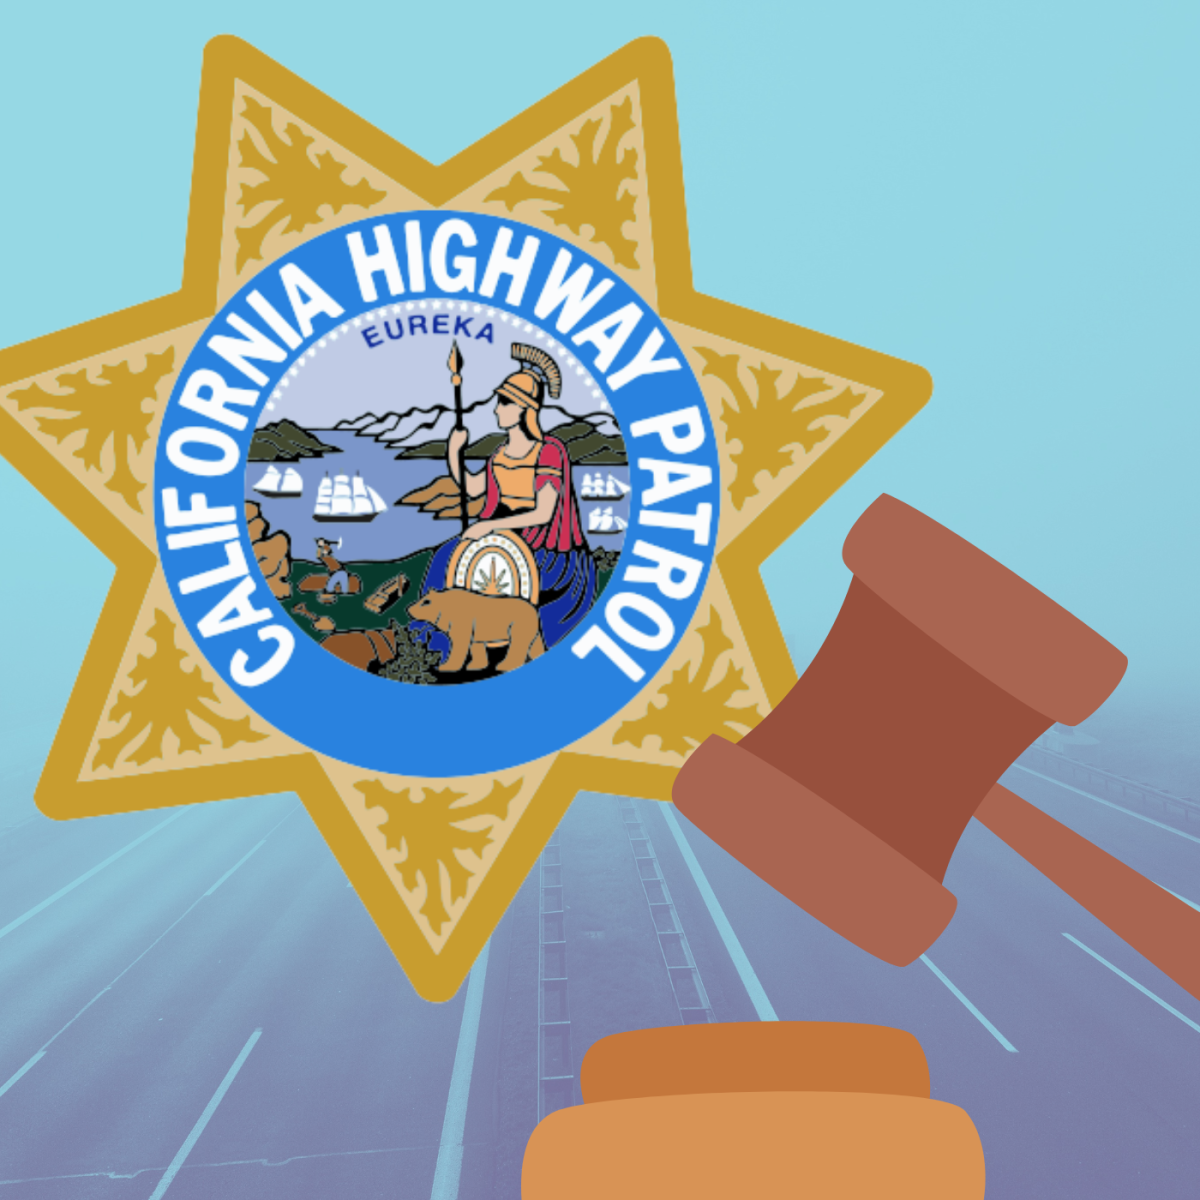 The CHP was sued by the Catsouras family. The case was eventually settled.